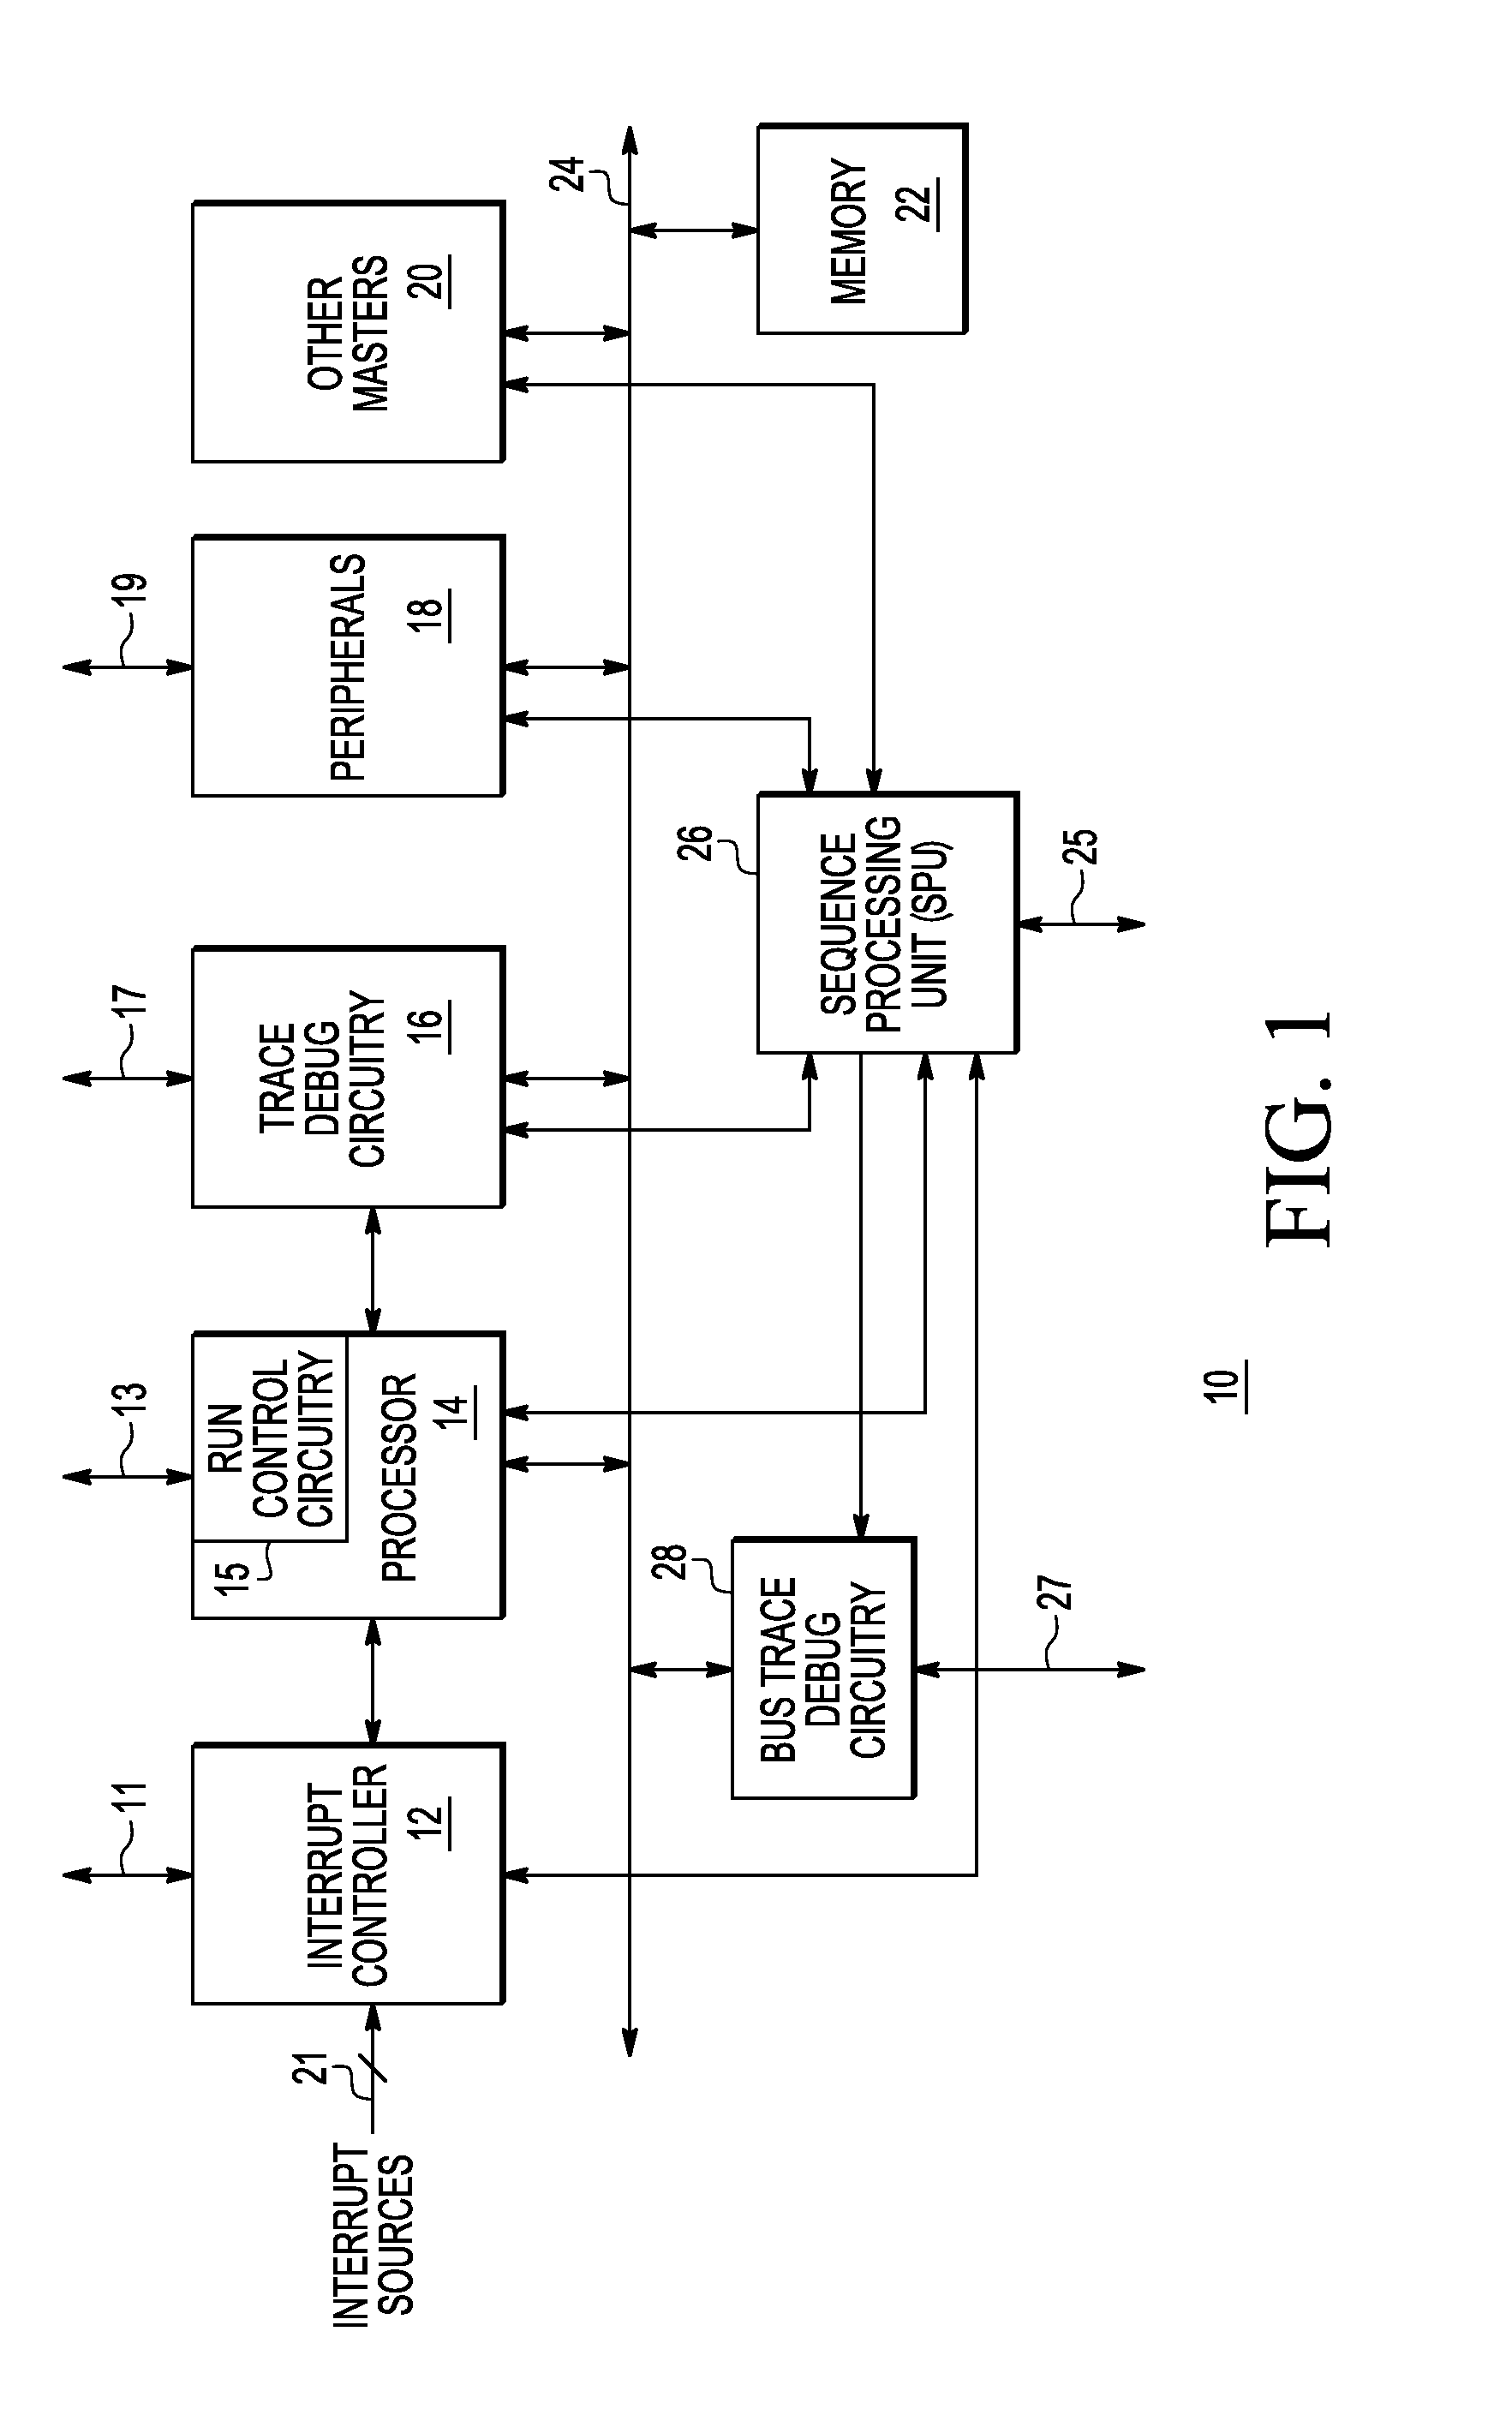 Data processing system having a sequence processing unit and method of operation